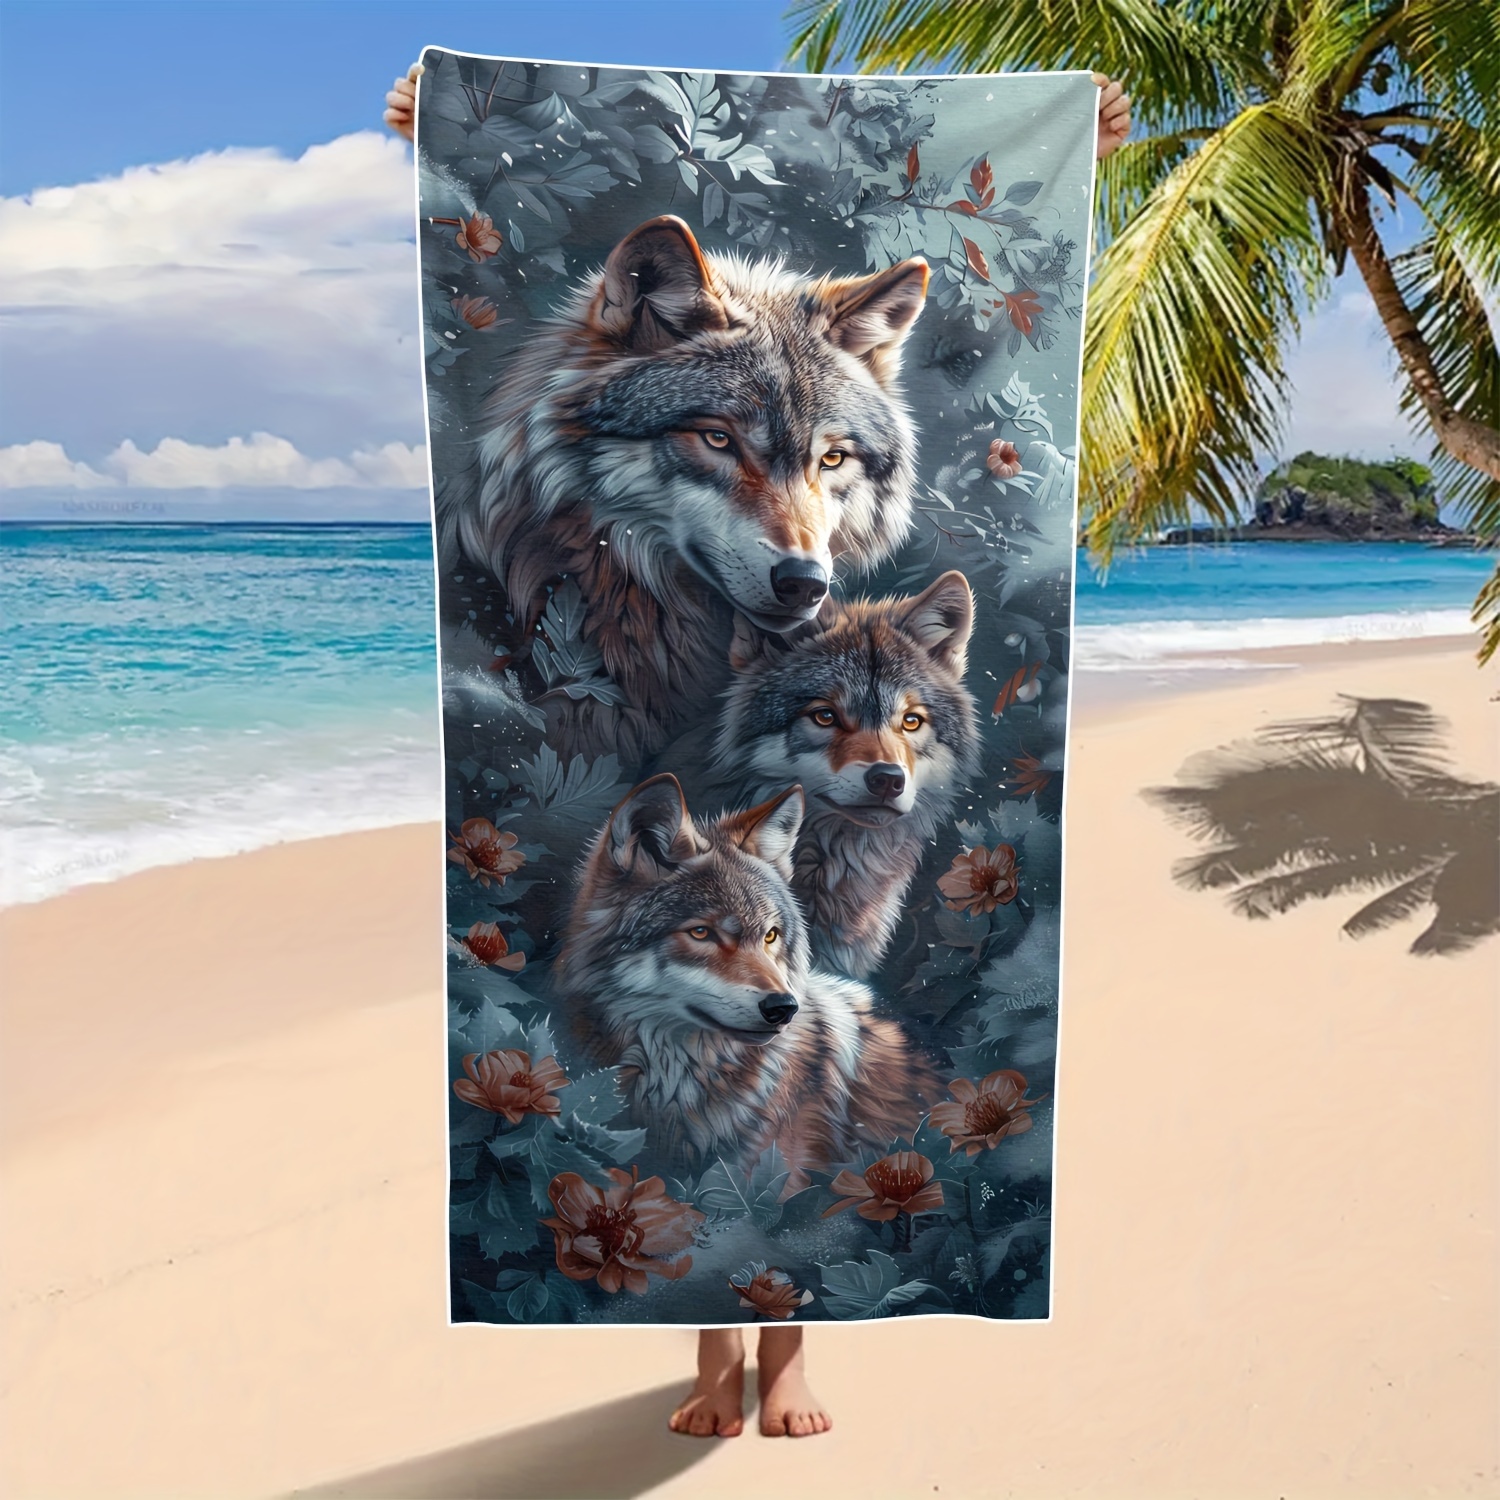 

Wolf Print Comfortable And Quick Drying Bath Towel, Large Light Weight Super Absorbent Camping Beach Blanket, For Outdoor Travel Holiday Camping Vacation Swimming Pool Yoga, Beach Essentials